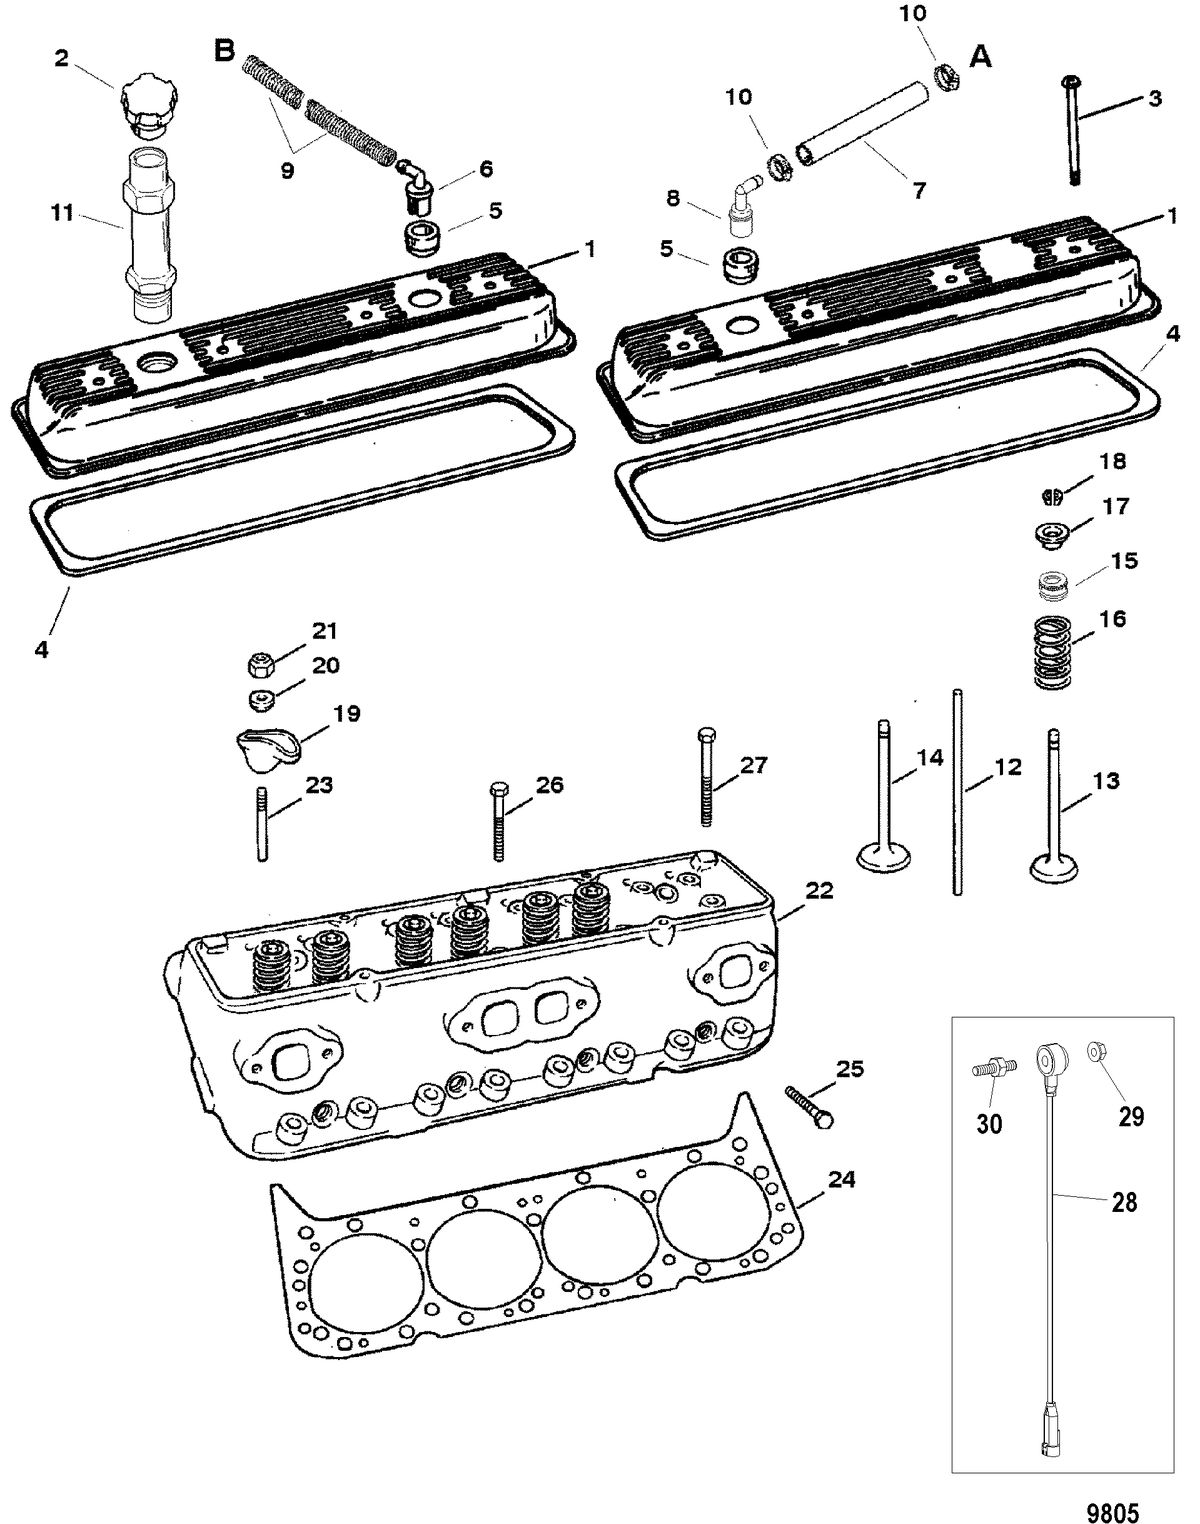 MERCRUISER MPI STERNDRIVE Cylinder Head and Rocker Cover